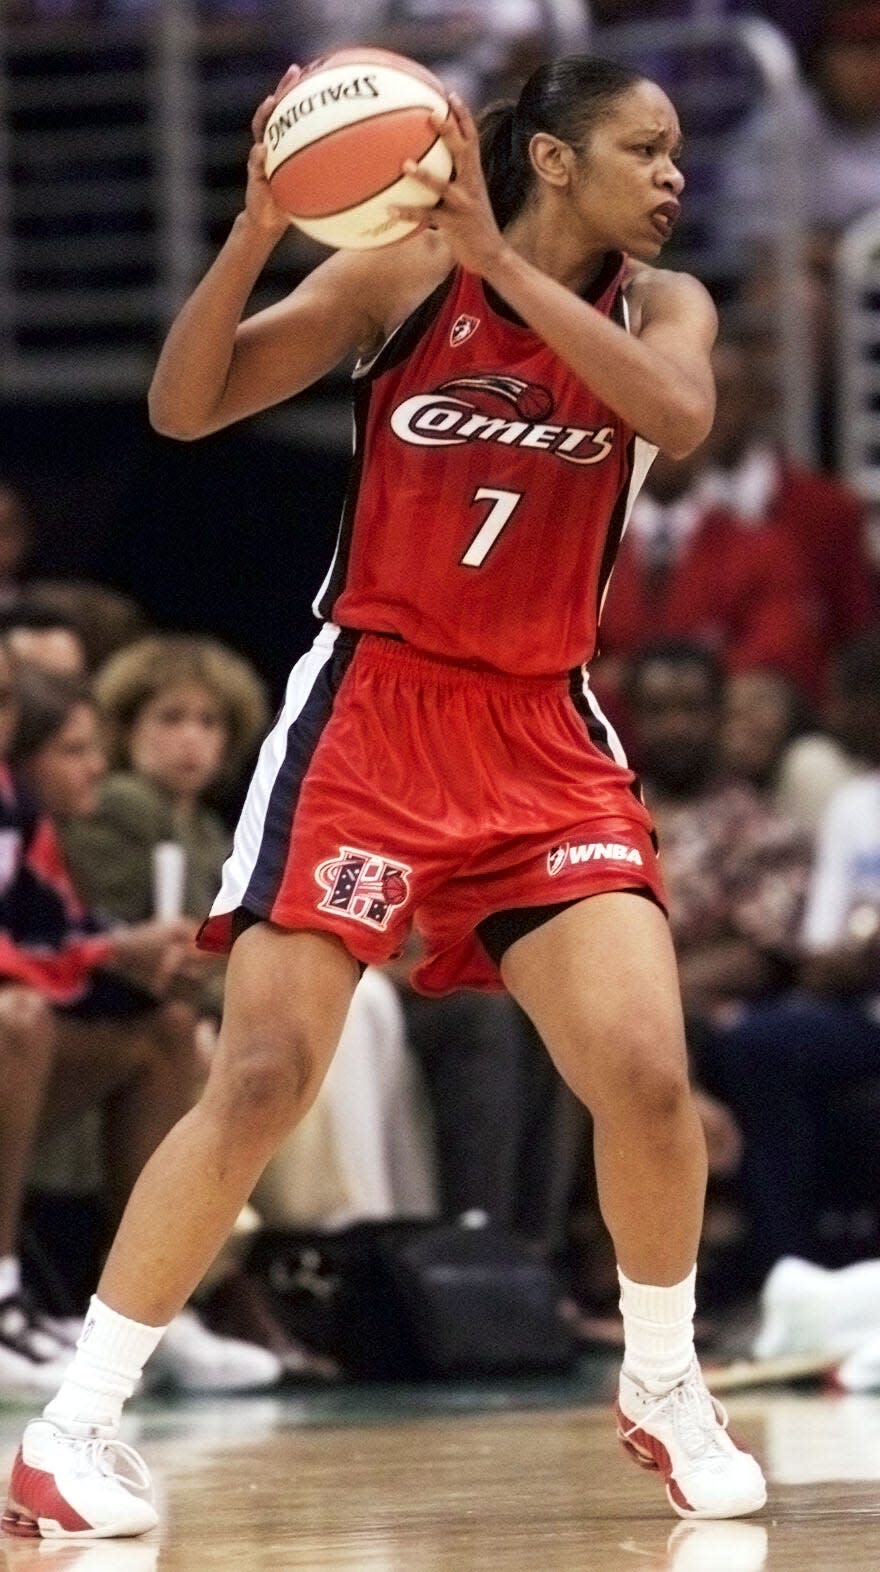 Forward Tina Thompson was one of the stars of the Houston Comets.